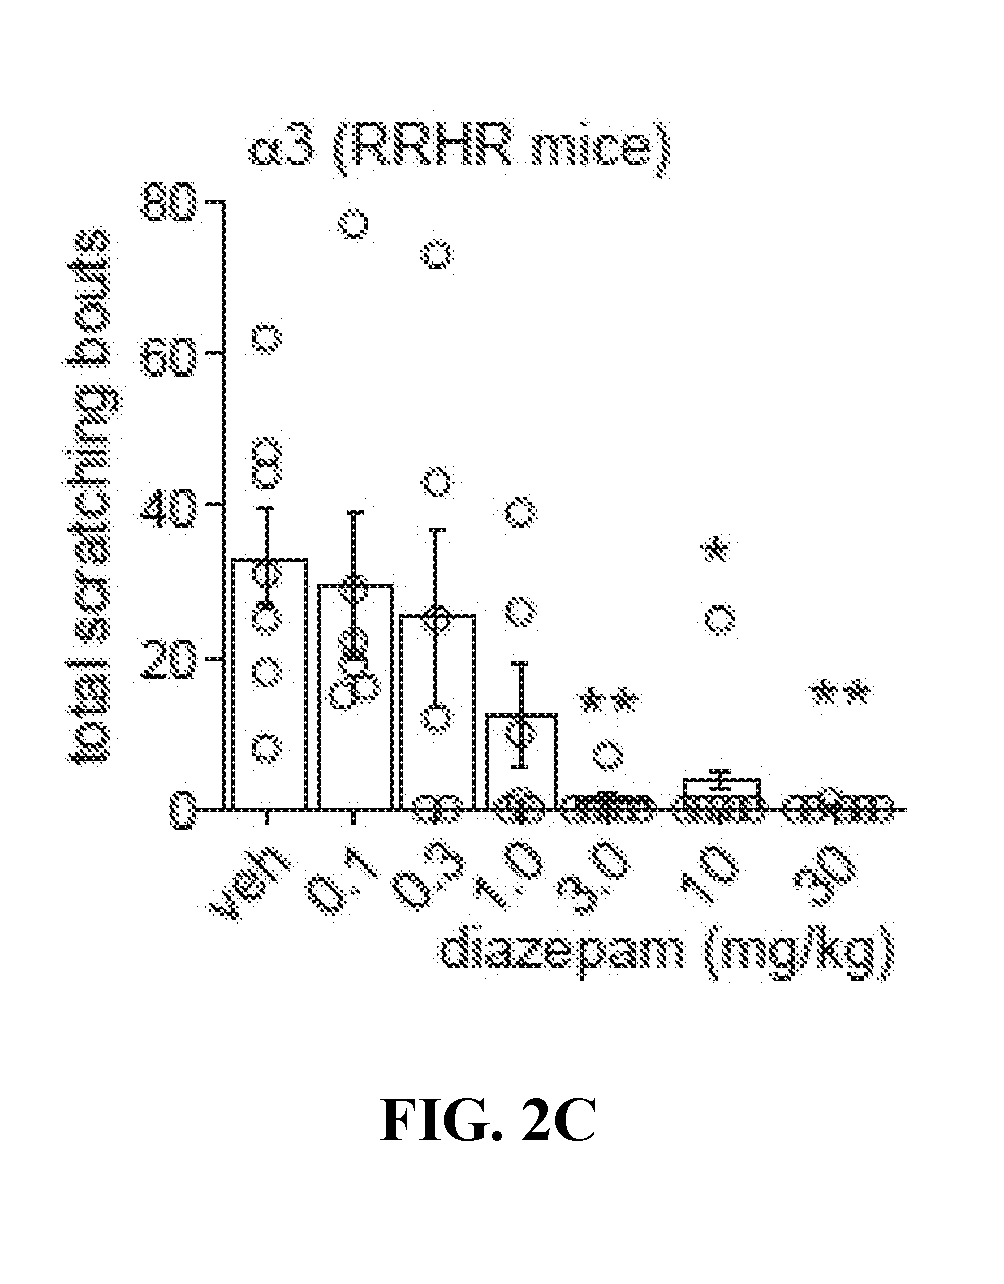 Use of gabaa receptor modulators for treatment of itch